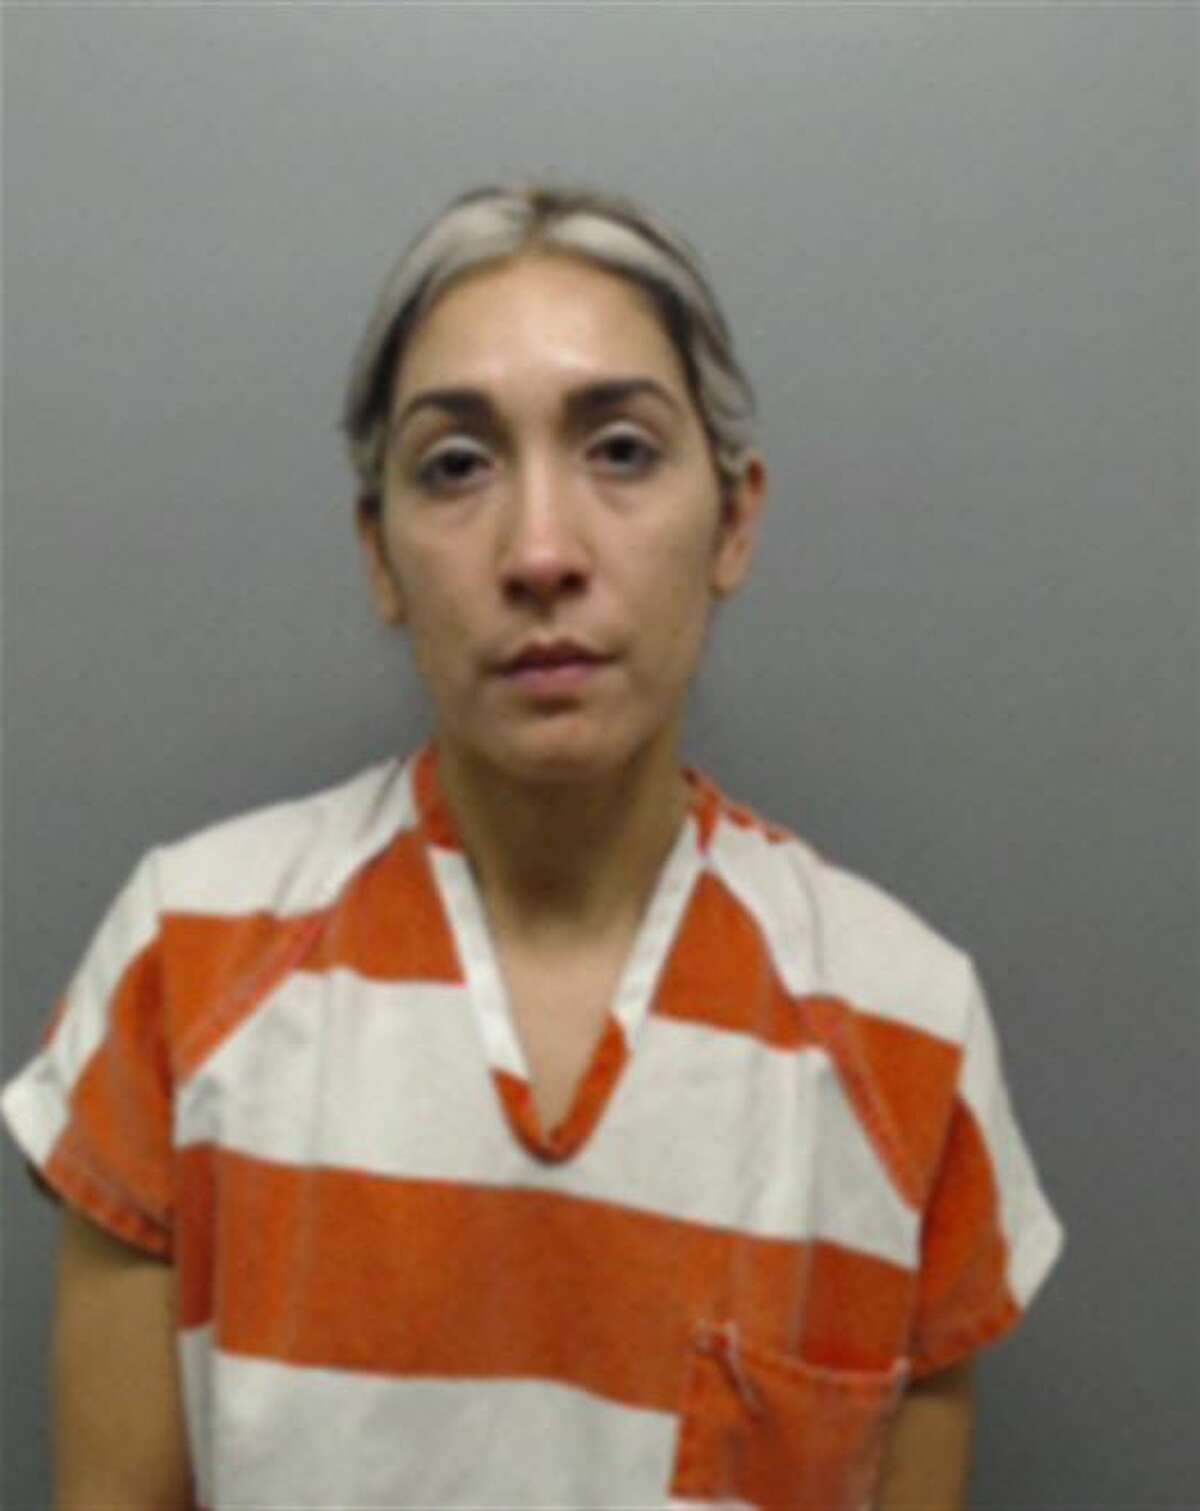 Karla Lee Aguilar, 31, was charged with felony theft Tuesday.